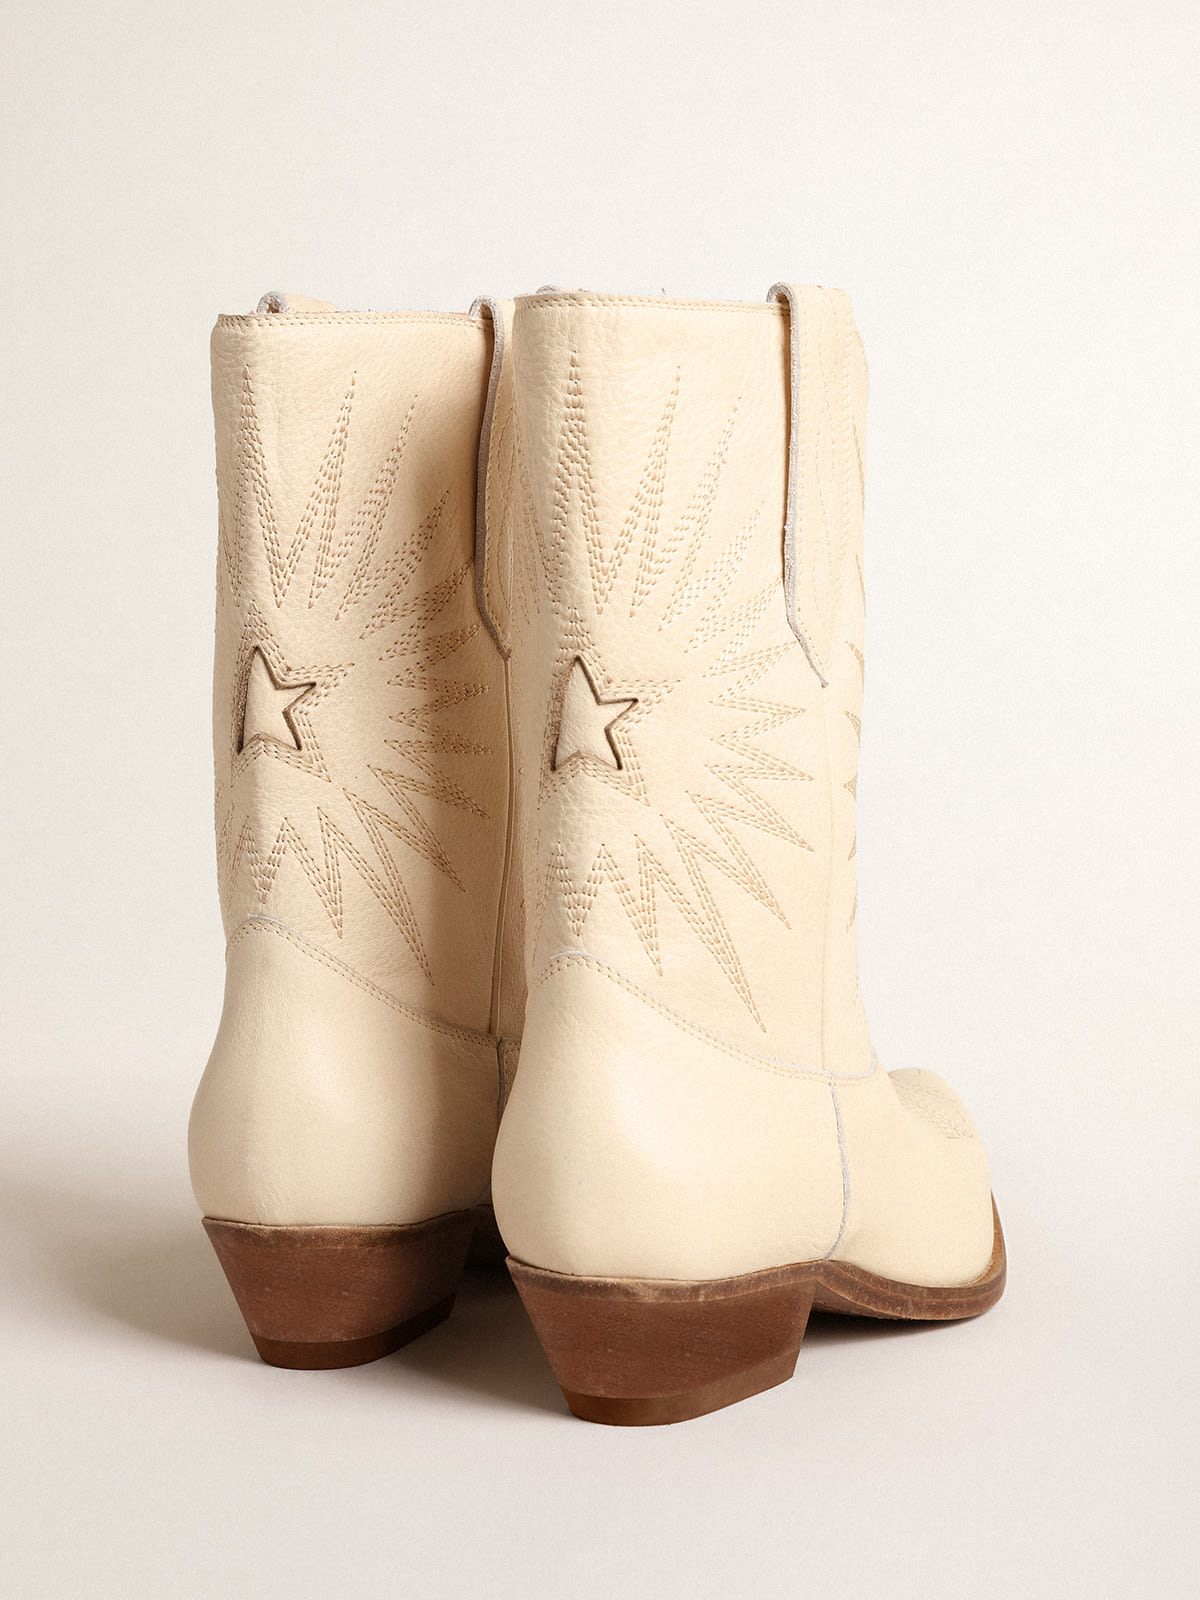 Golden Goose - Low Wish Star boots in cream-colored leather with inlay star in 